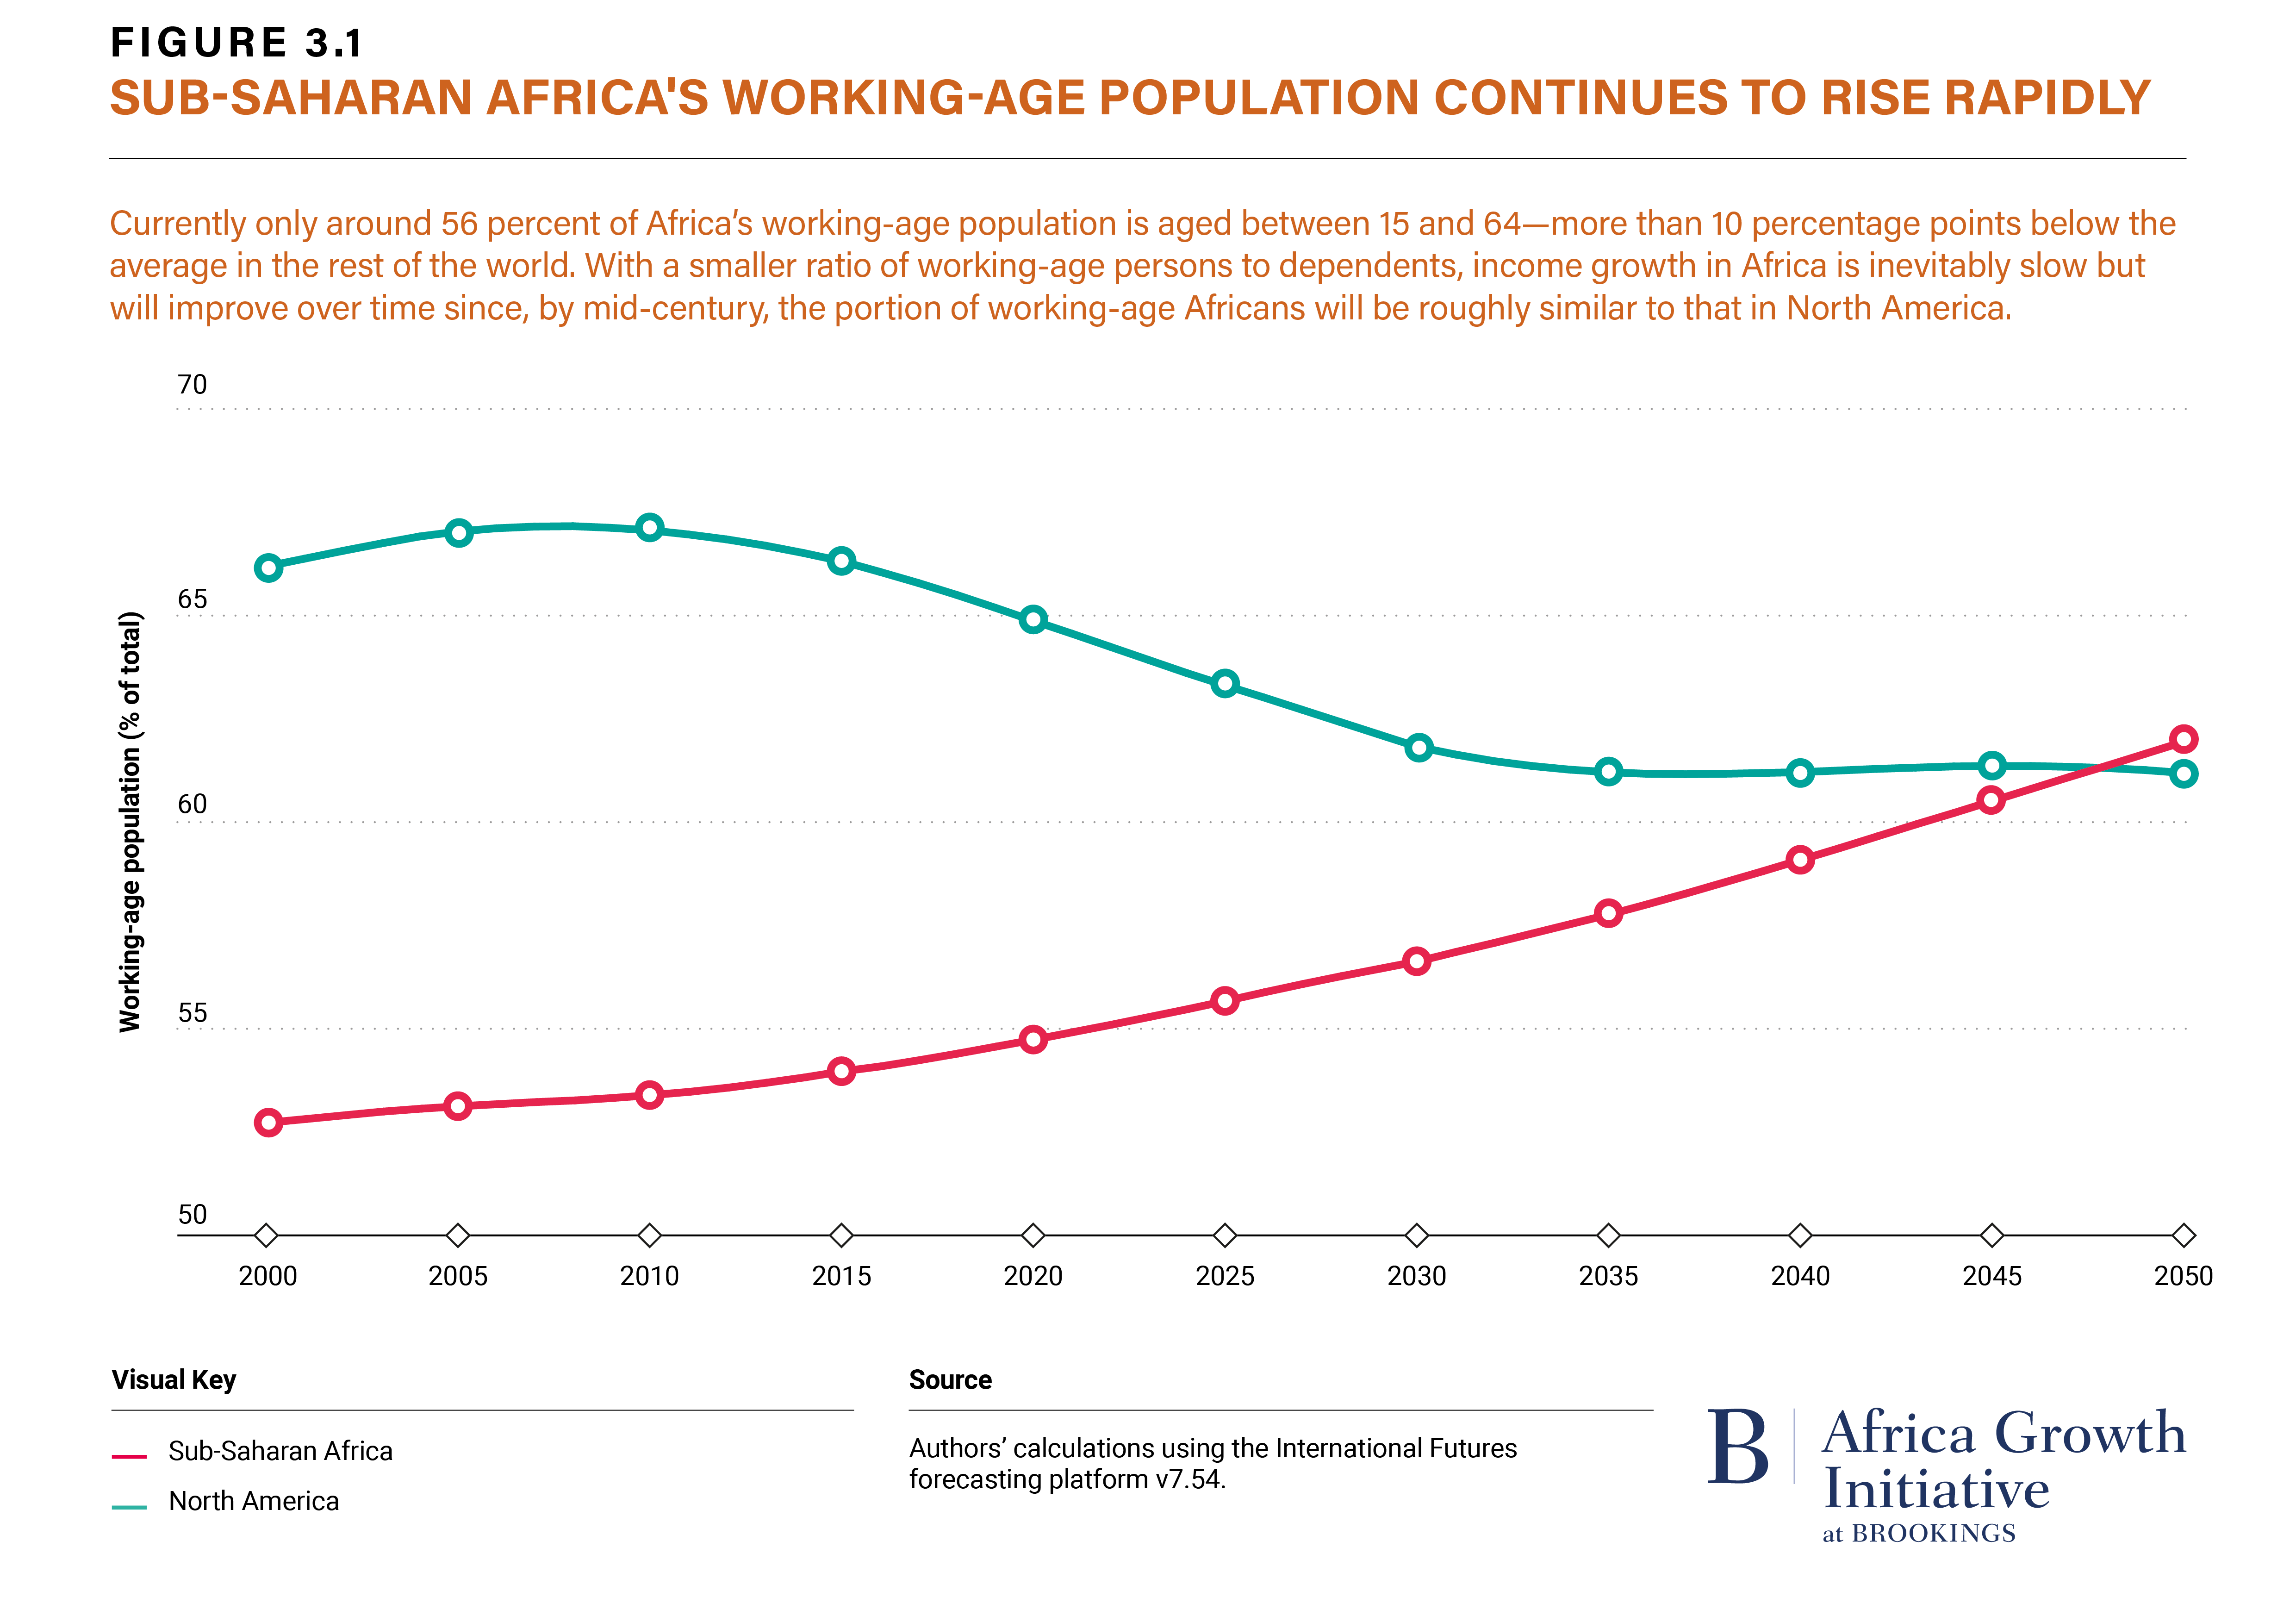 Figure 3.1 Sub-Saharan Africa's Working-Age Population Continues to Rise Rapidly